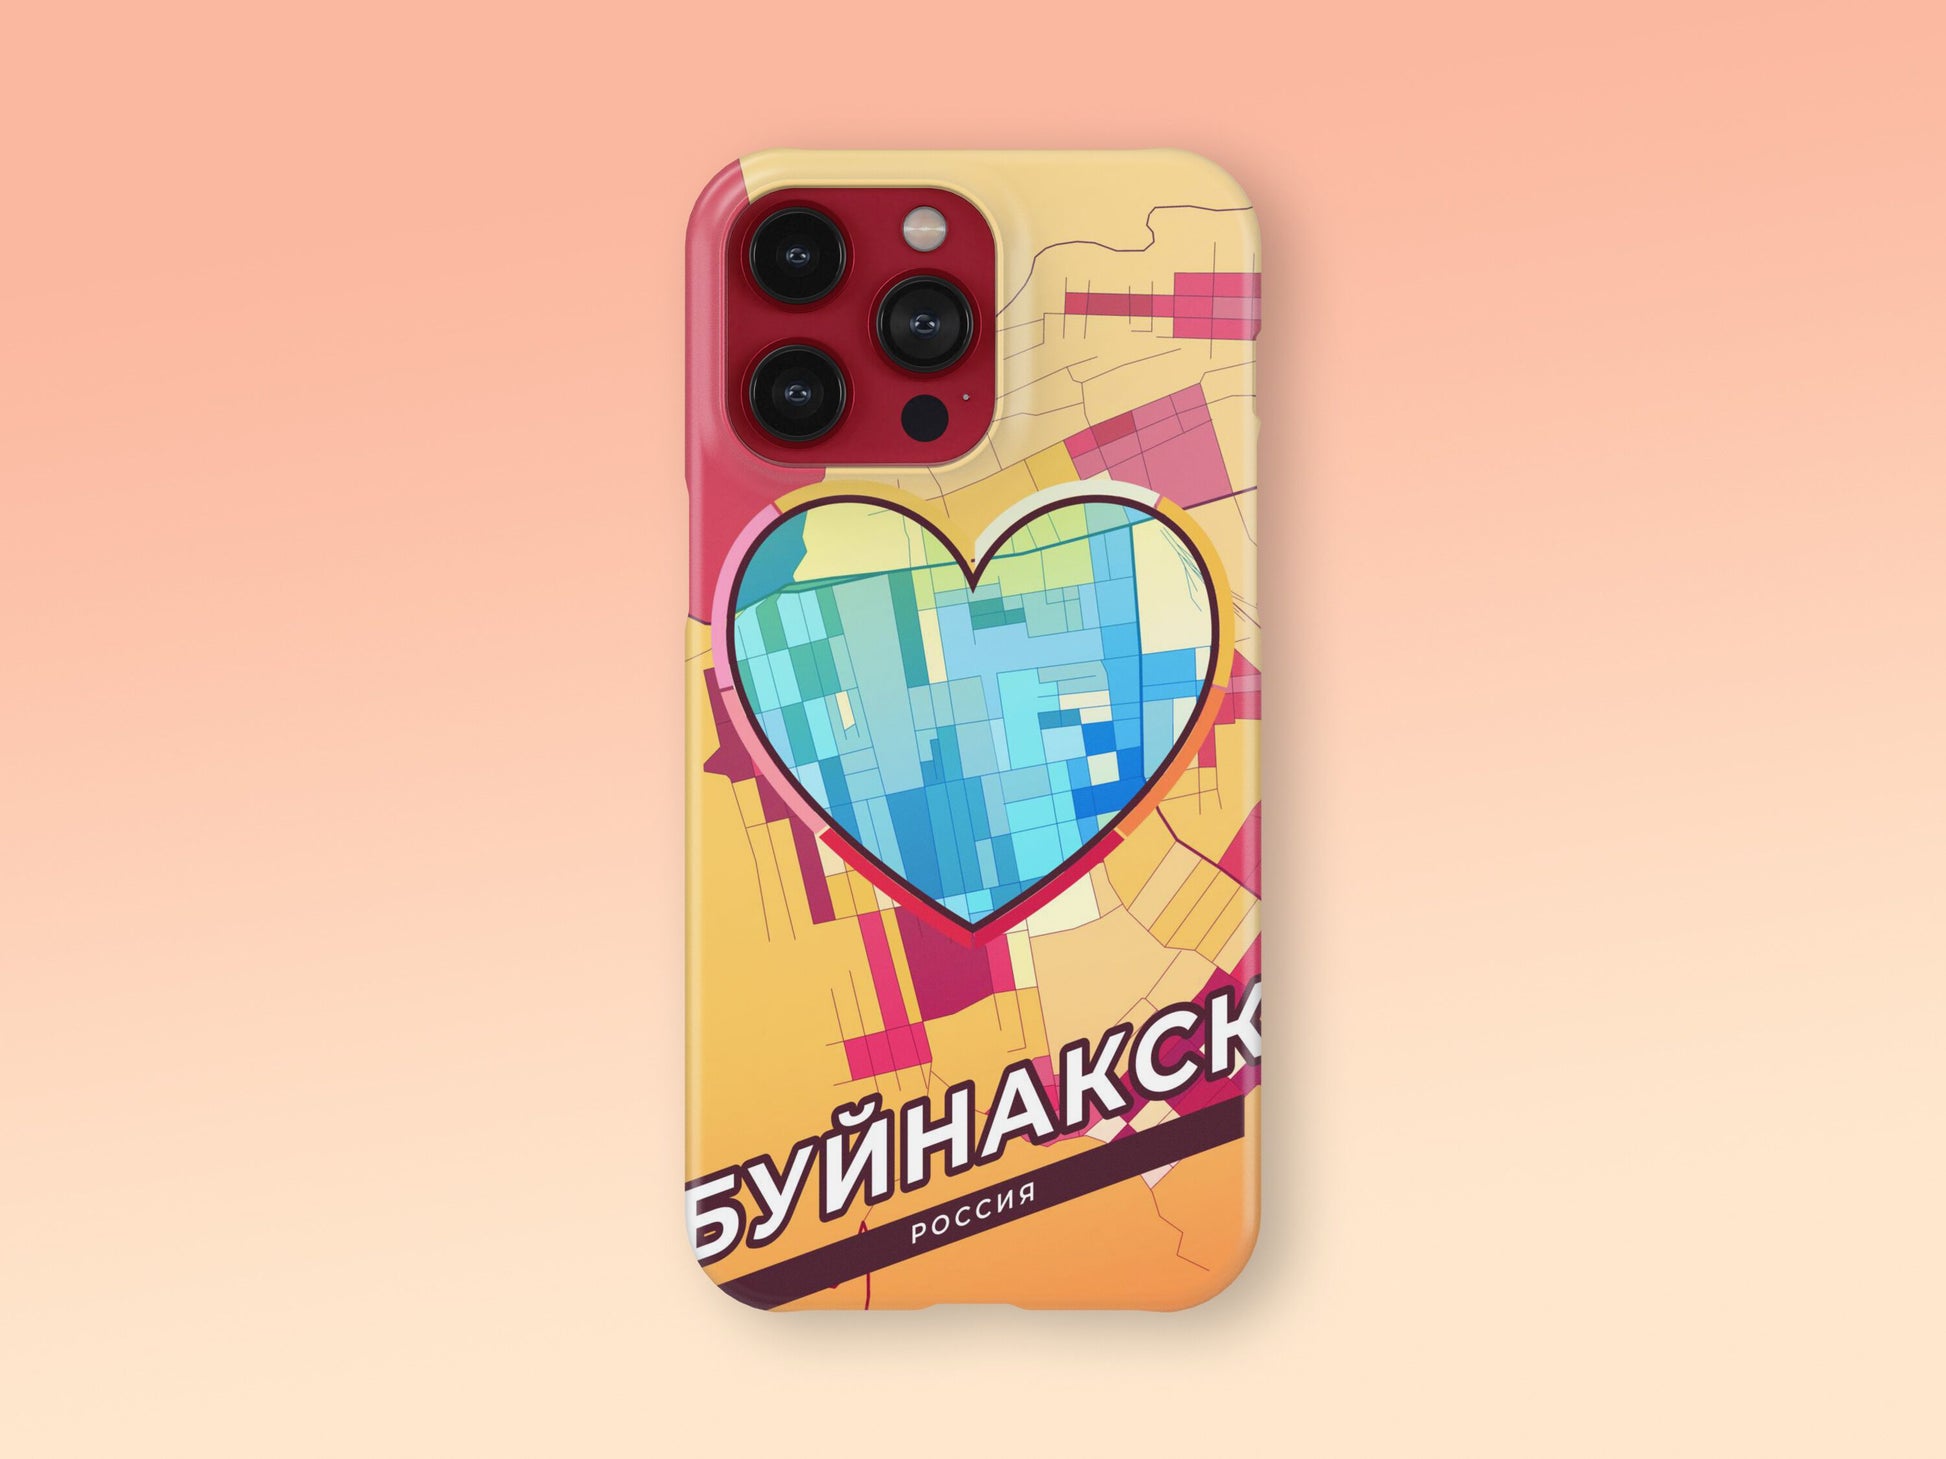 Buynaksk Russia slim phone case with colorful icon. Birthday, wedding or housewarming gift. Couple match cases. 2